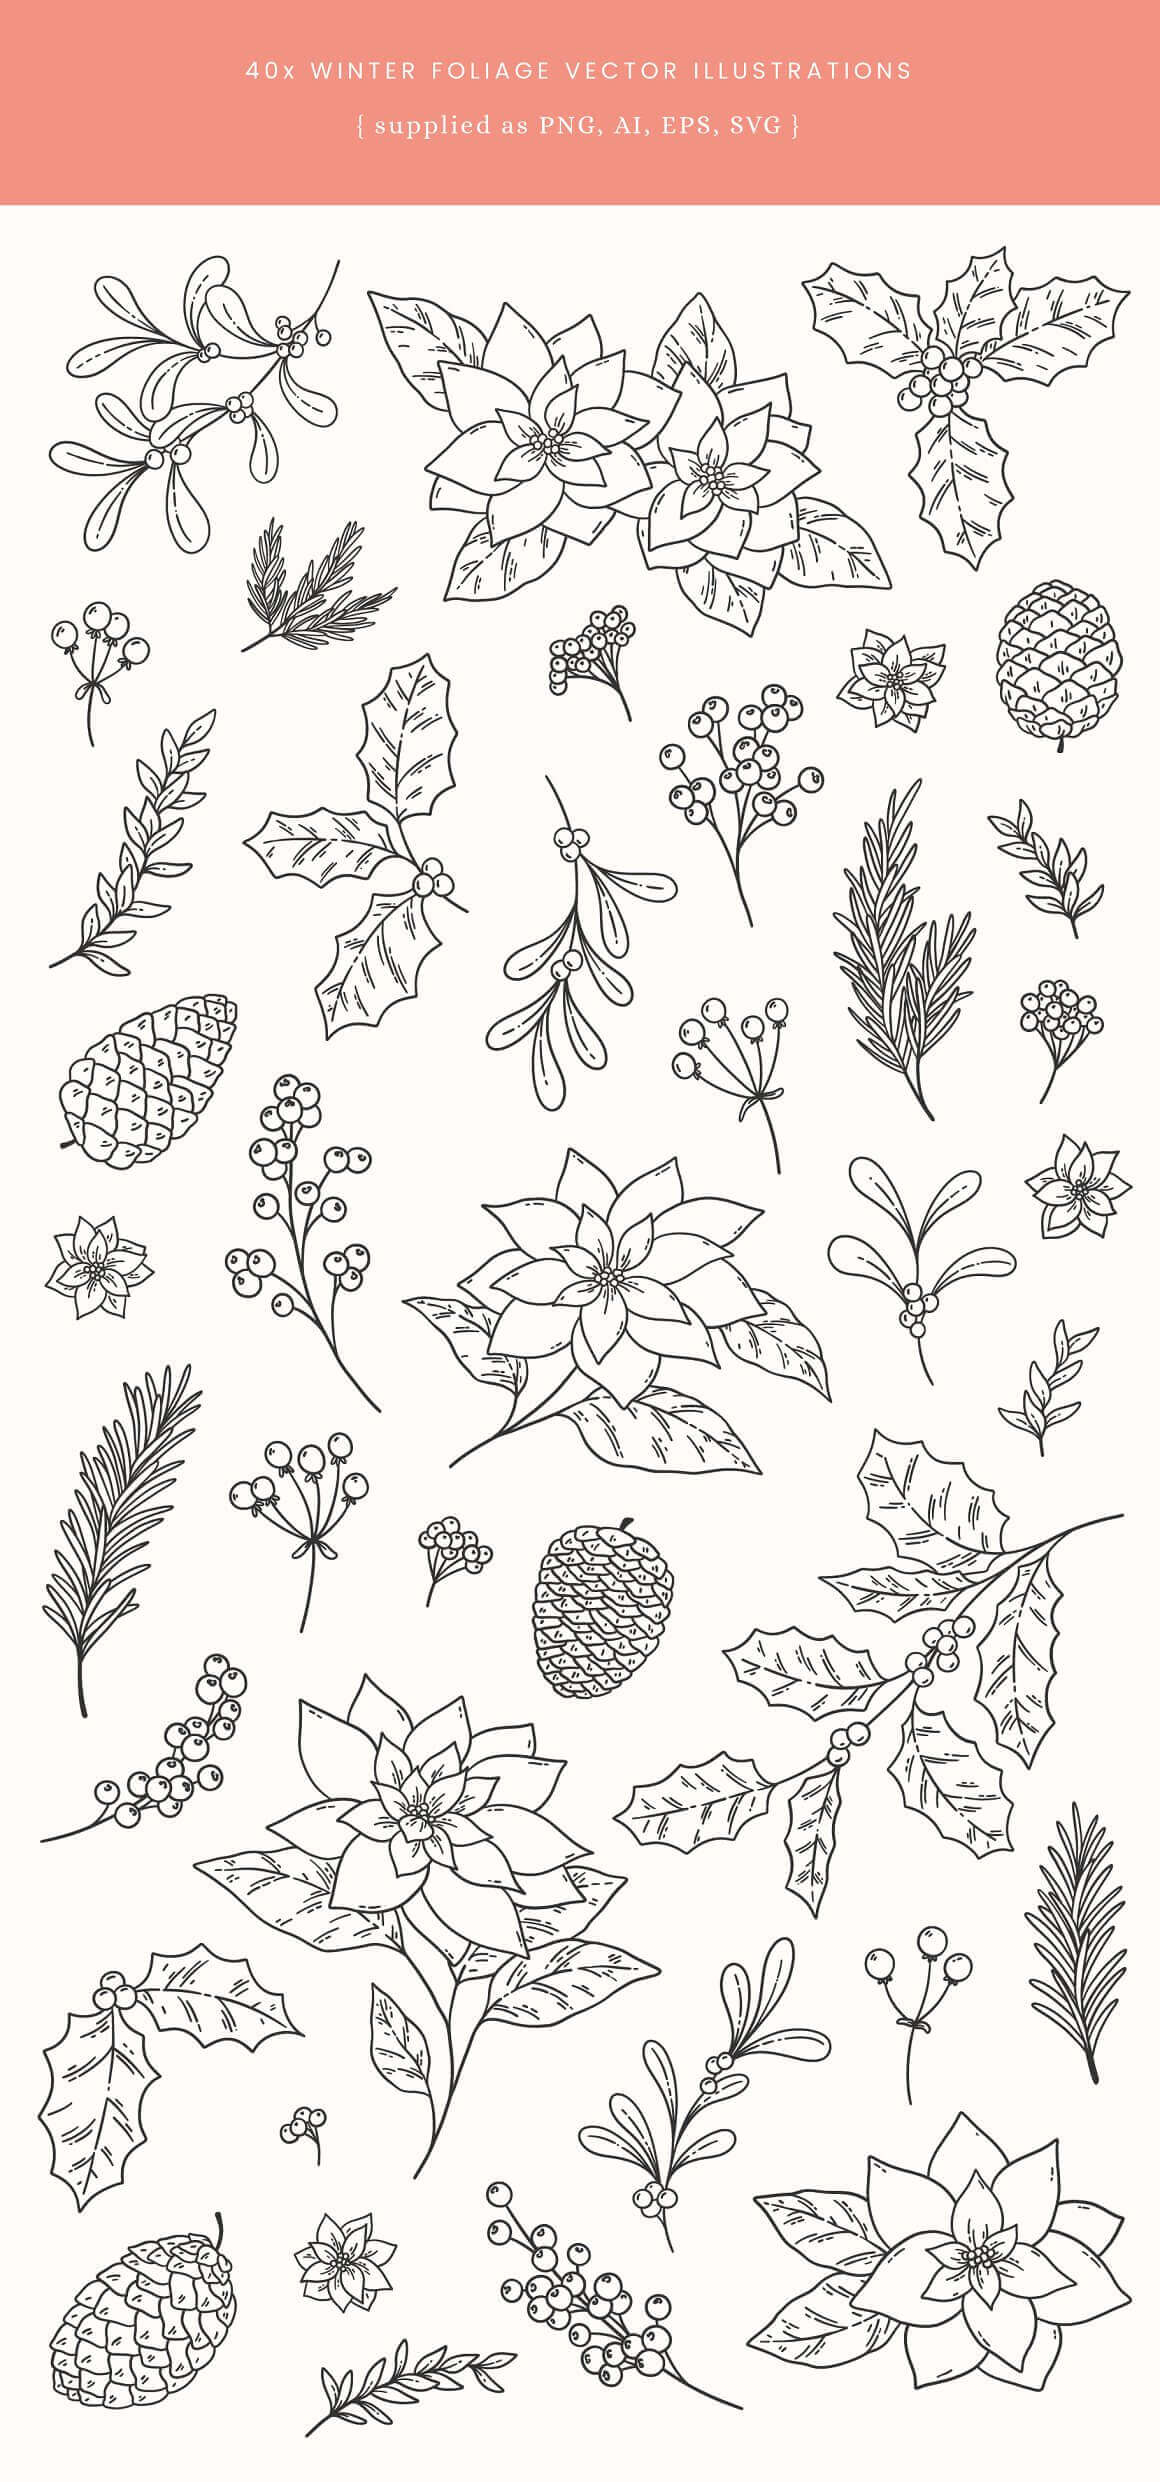 The contours of winter foliage, berries and flowers are drawn on a white background.